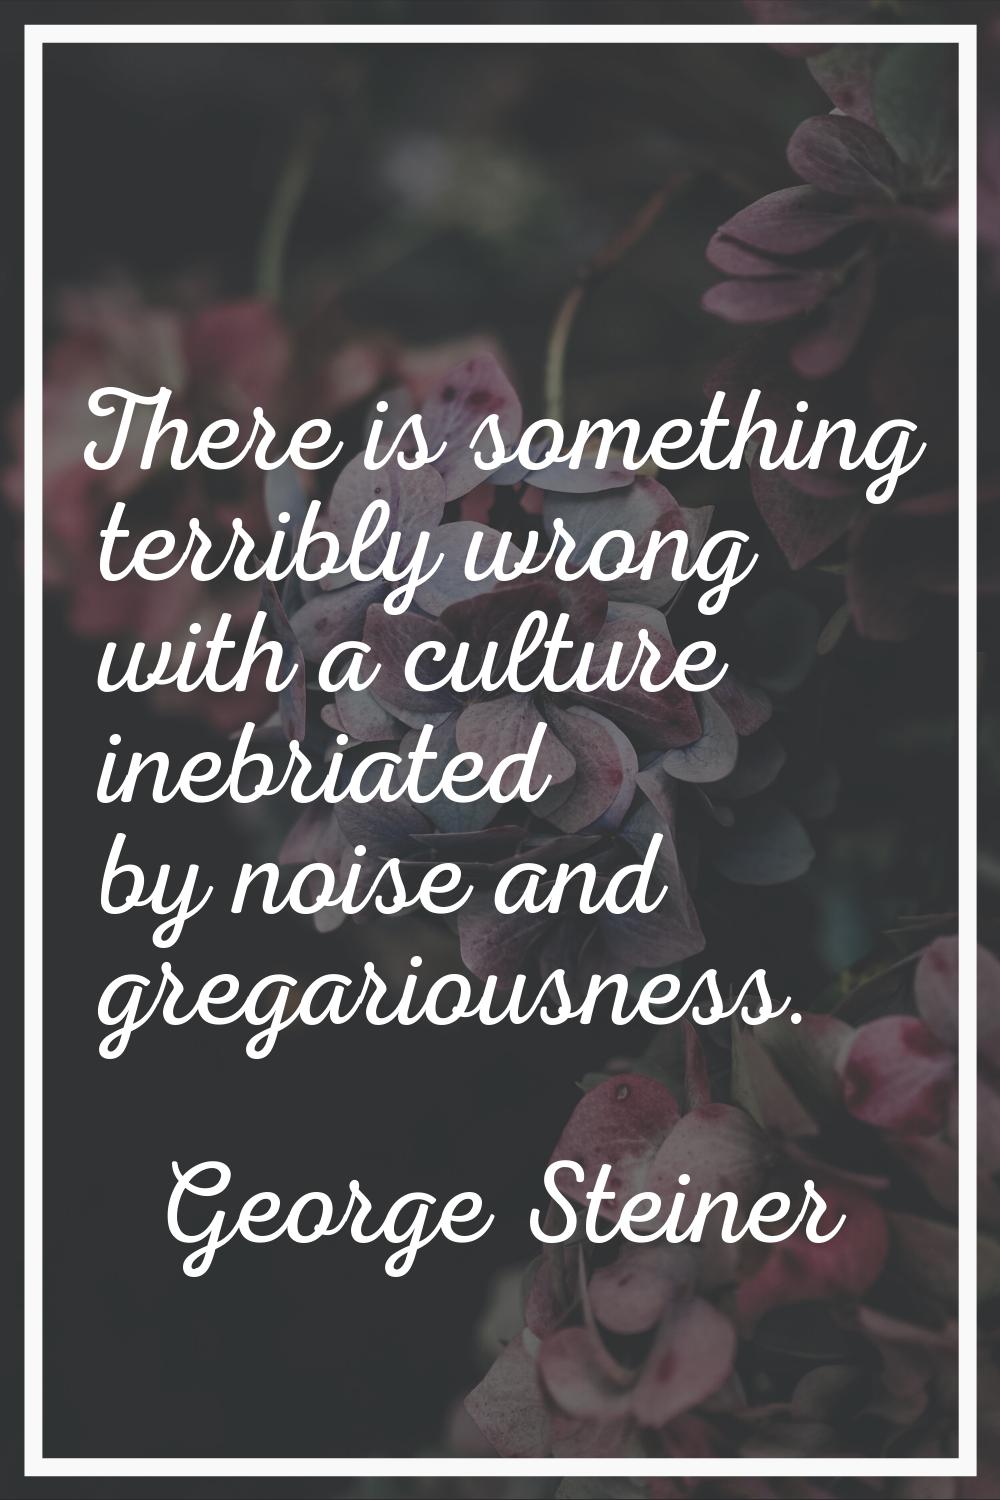 There is something terribly wrong with a culture inebriated by noise and gregariousness.